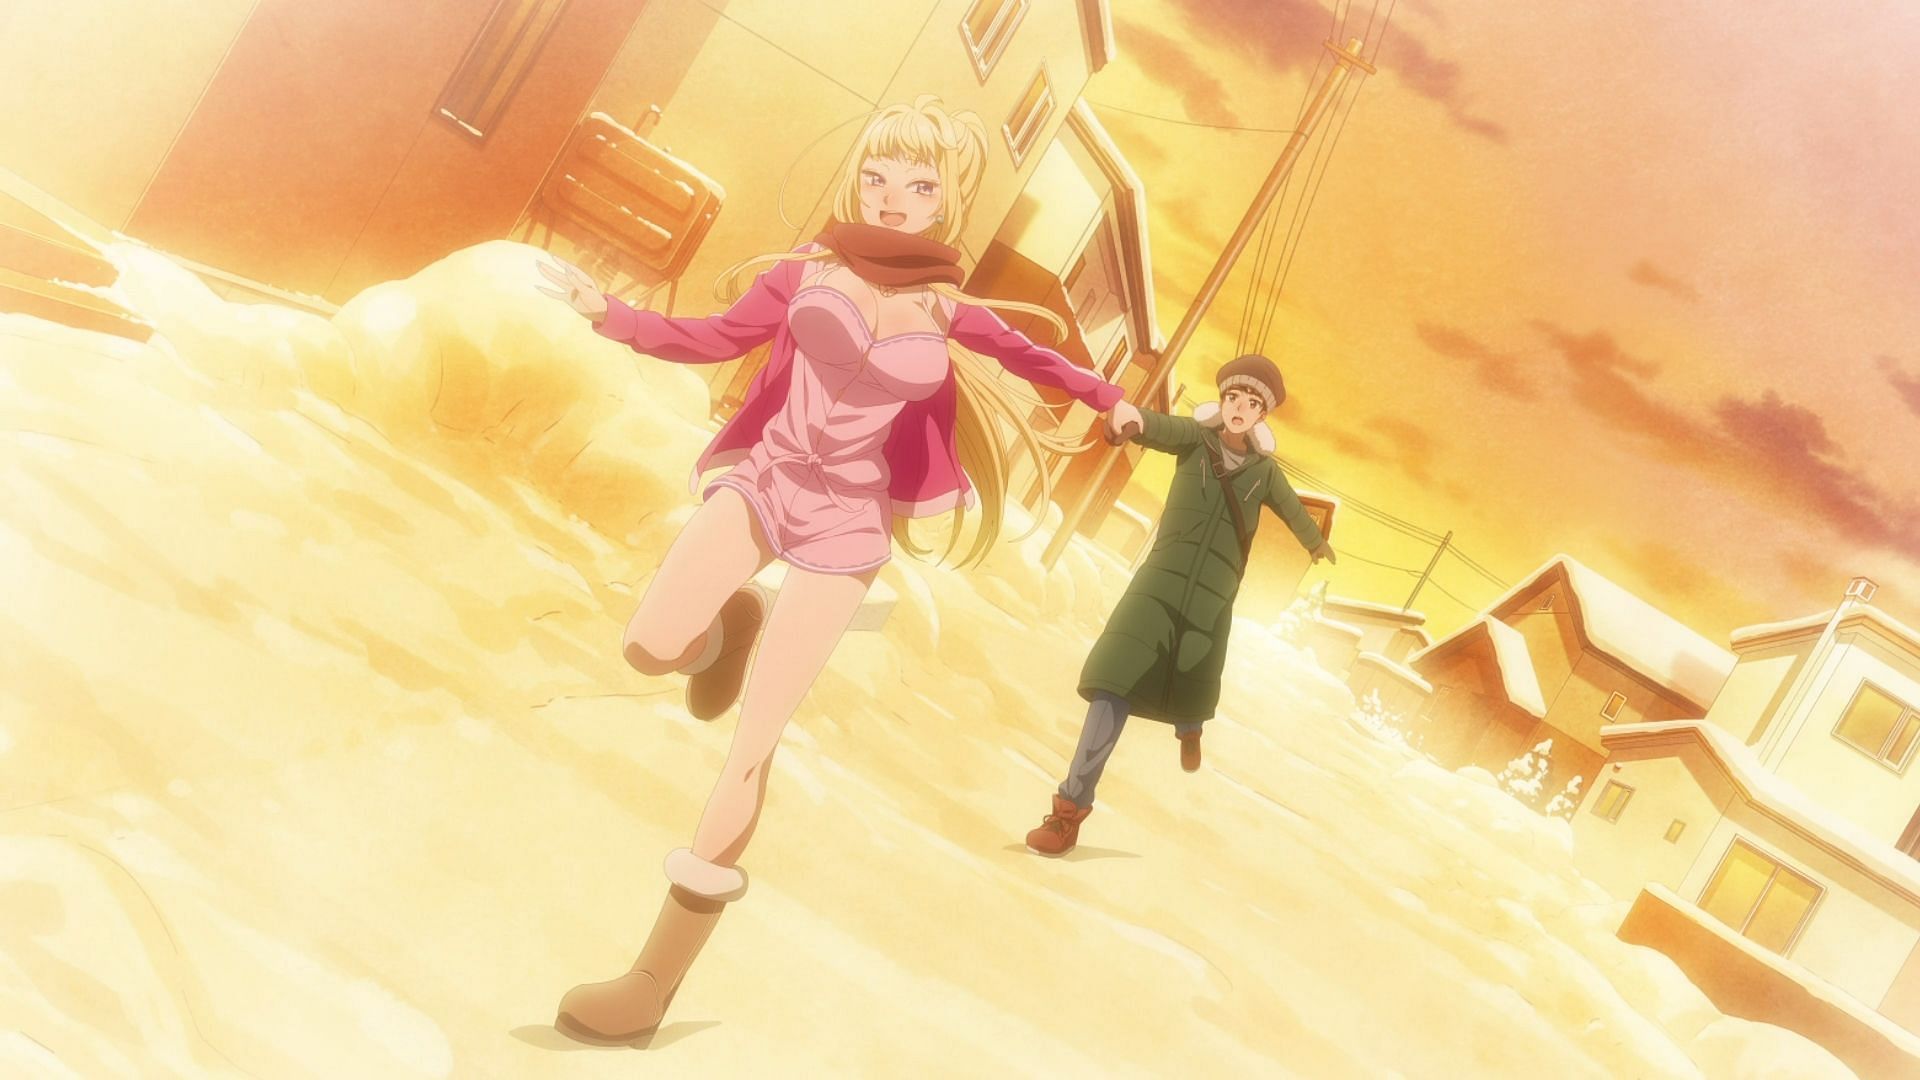 Tsubasa and Minami, as seen in the anime (Image via Silver Link and Blade)